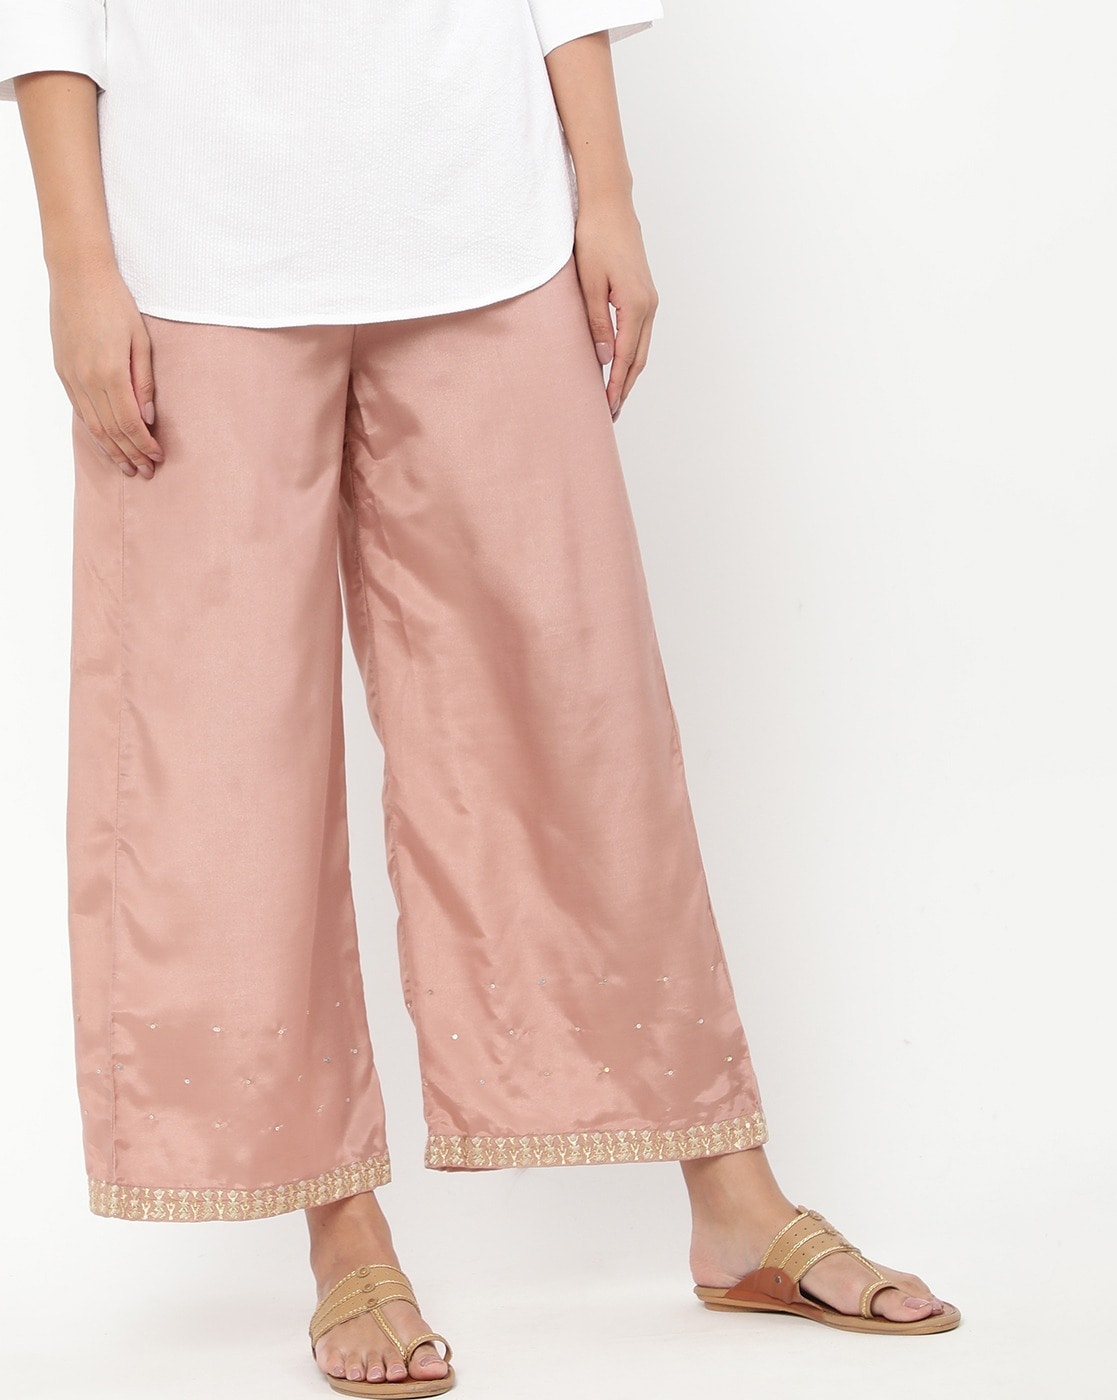 Buy YOZLY Women's Rayon Solid Maroon & Baby Pink Palazzo Pants Free Size  (Pack of 2) at Amazon.in